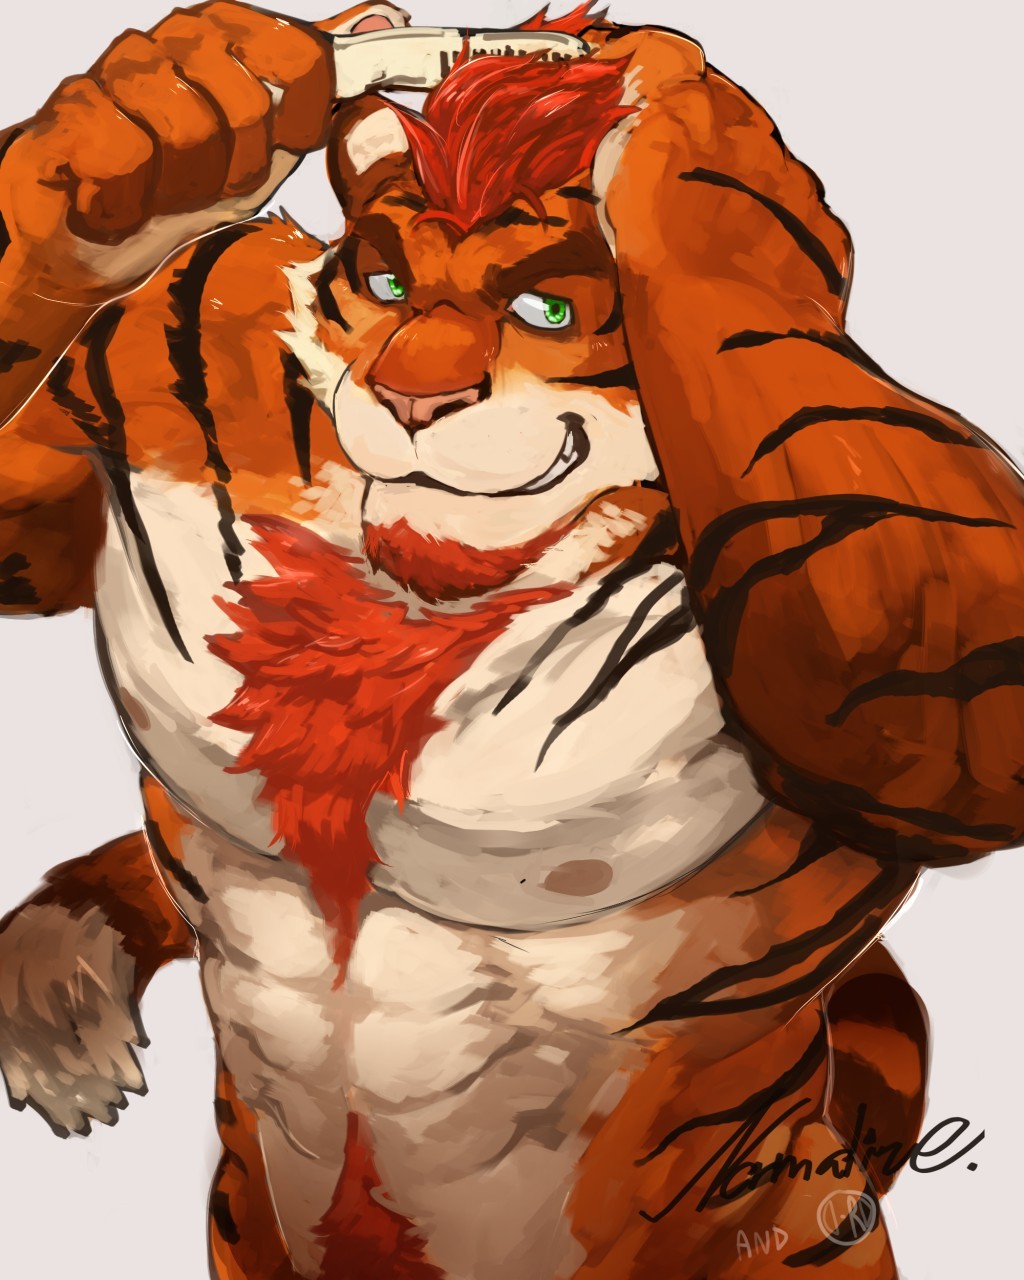 Mr, TigerCollaboration between O-ro    On FA    On Twitter andNormalize on FA 